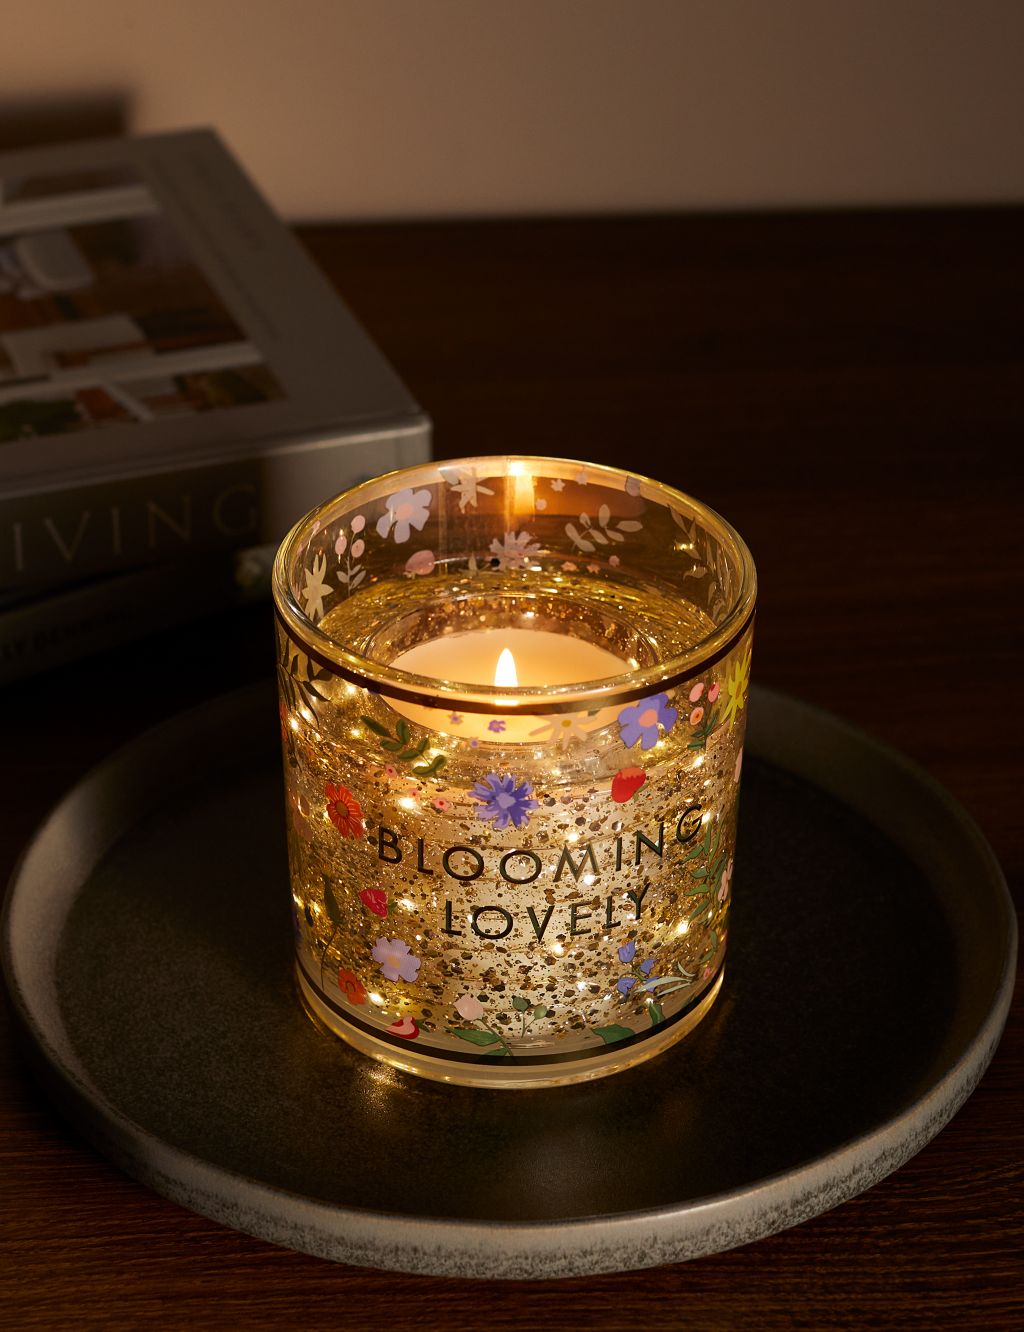 Blooming Lovely Light Up Candle image 1